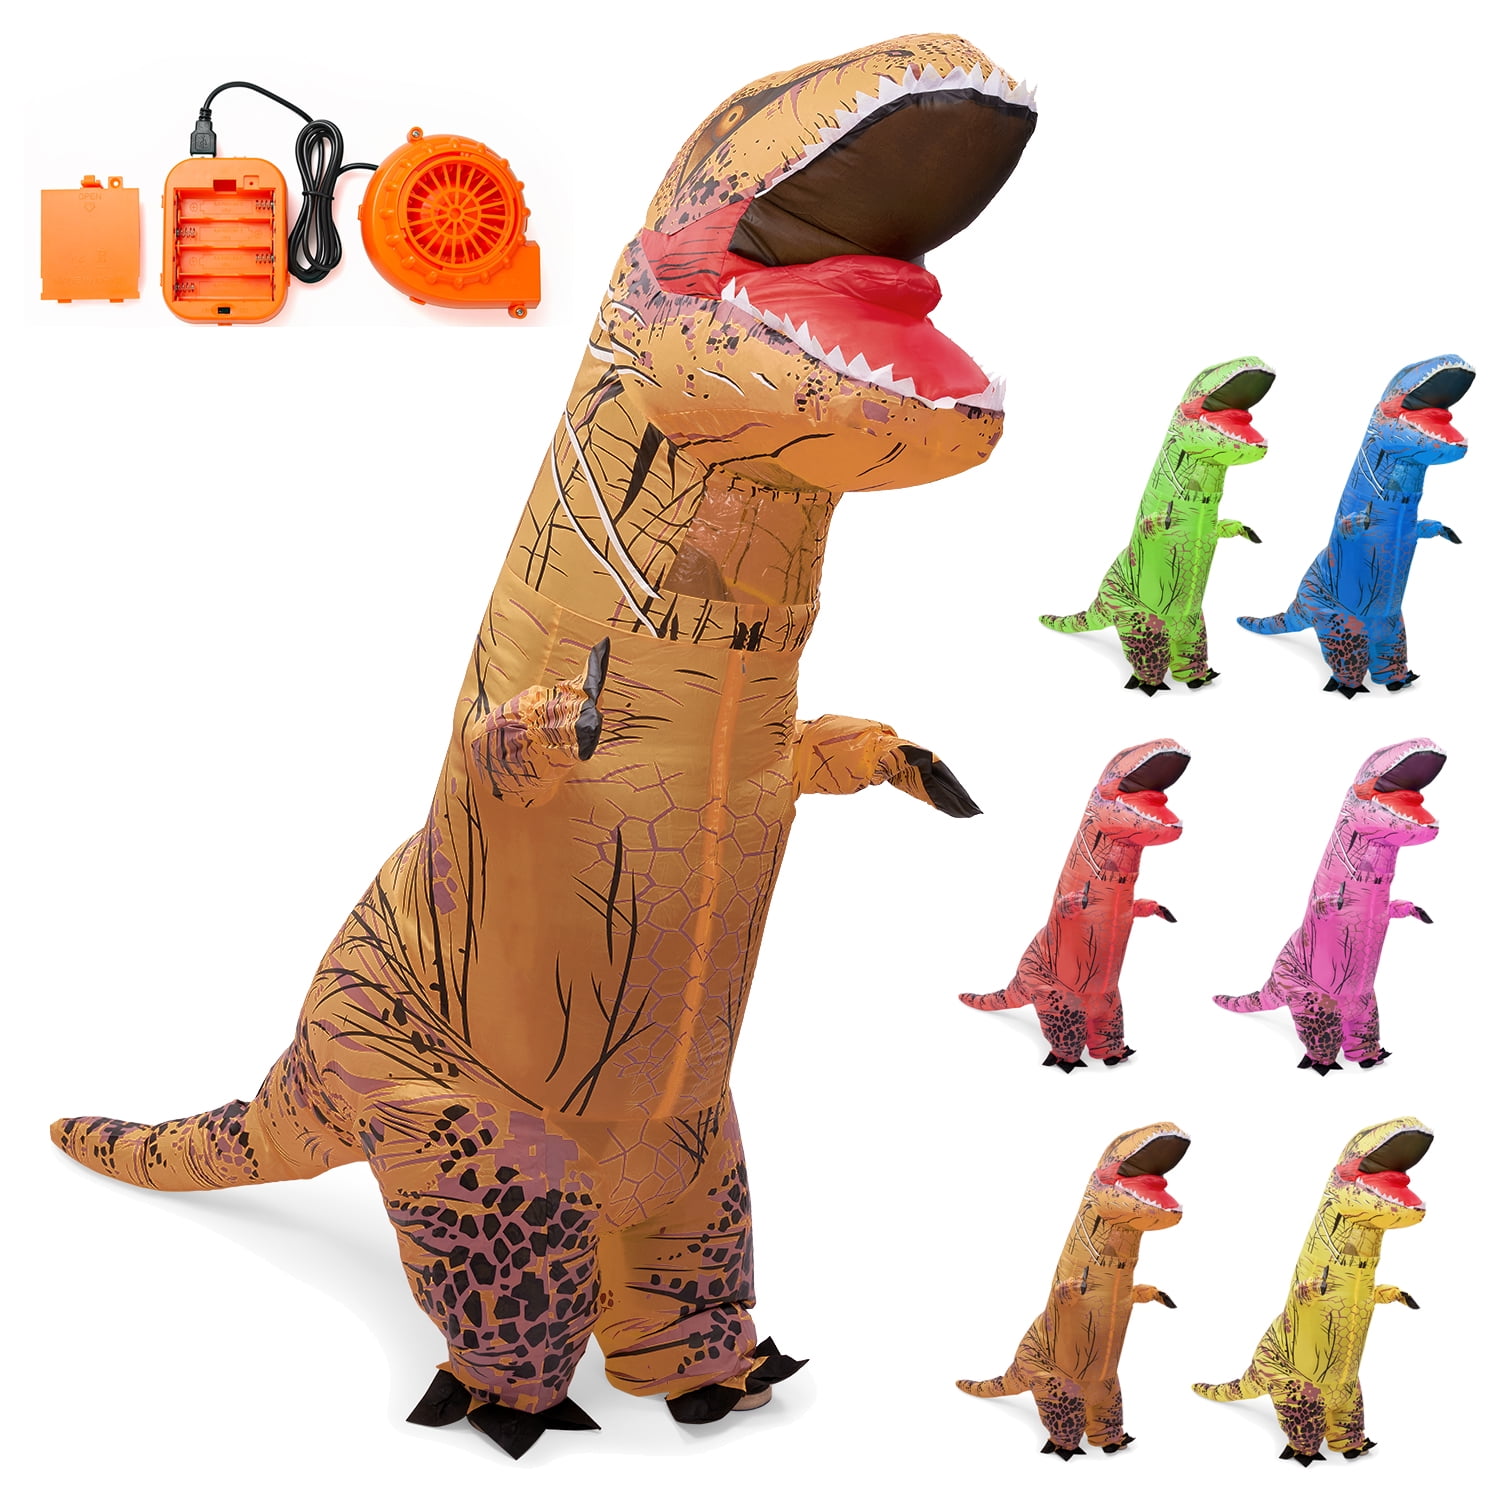 Xmas Party T-REX Inflatable Dinosaur Costume Jurassic Dress Blowup Outfit 2 Size 